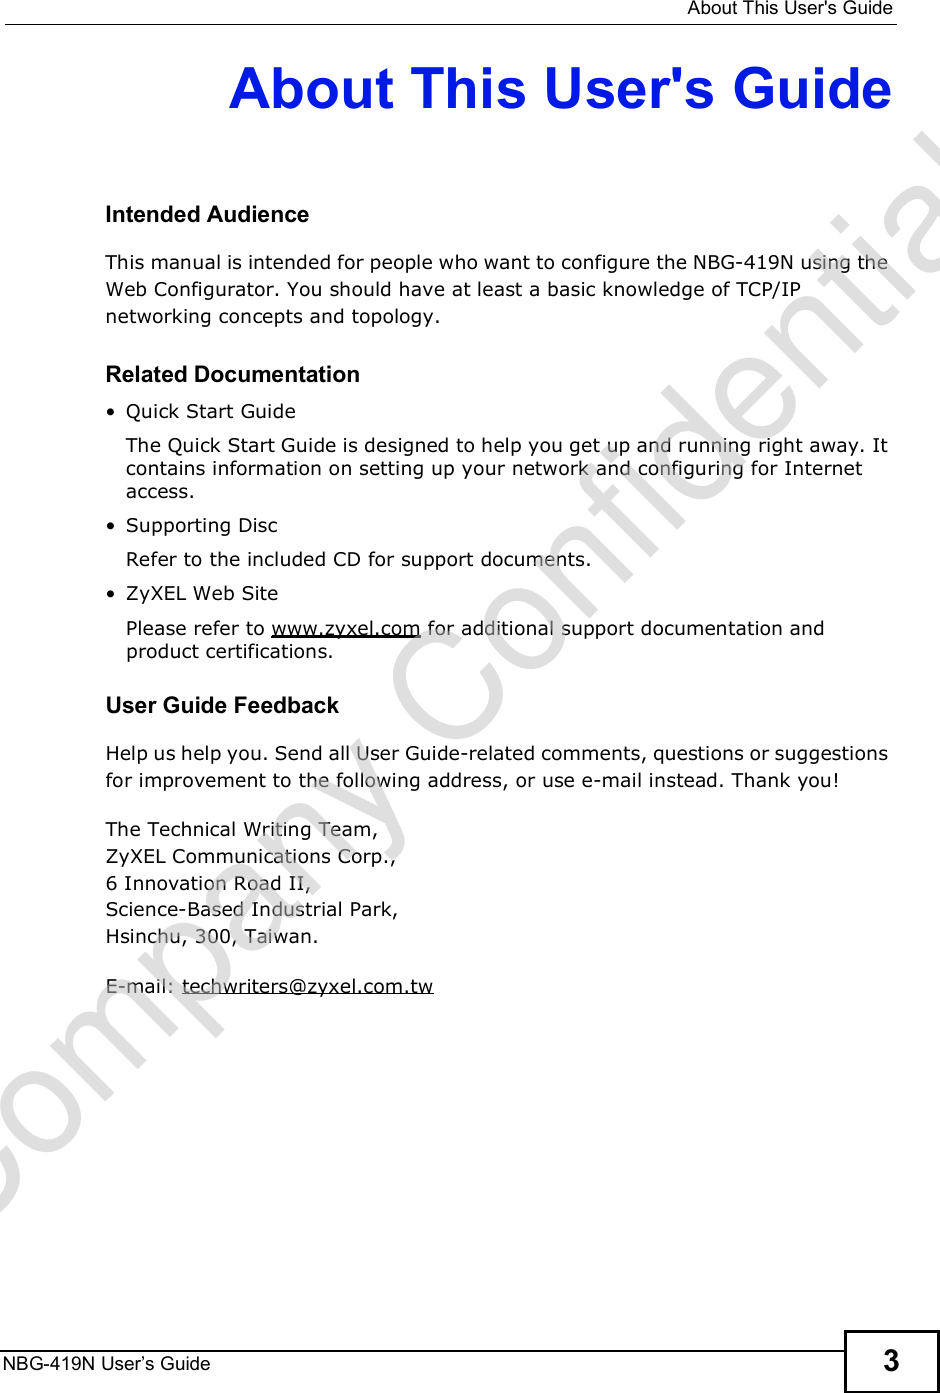  About This User&apos;s GuideNBG-419N User s Guide 3About This User&apos;s GuideIntended AudienceThis manual is intended for people who want to configure the NBG-419N using the Web Configurator. You should have at least a basic knowledge of TCP/IP networking concepts and topology.Related Documentation Quick Start Guide The Quick Start Guide is designed to help you get up and running right away. It contains information on setting up your network and configuring for Internet access. Supporting DiscRefer to the included CD for support documents. ZyXEL Web SitePlease refer to www.zyxel.com for additional support documentation and product certifications.User Guide FeedbackHelp us help you. Send all User Guide-related comments, questions or suggestions for improvement to the following address, or use e-mail instead. Thank you!The Technical Writing Team,ZyXEL Communications Corp.,6 Innovation Road II,Science-Based Industrial Park, Hsinchu, 300, Taiwan.E-mail: techwriters@zyxel.com.twCompany Confidential